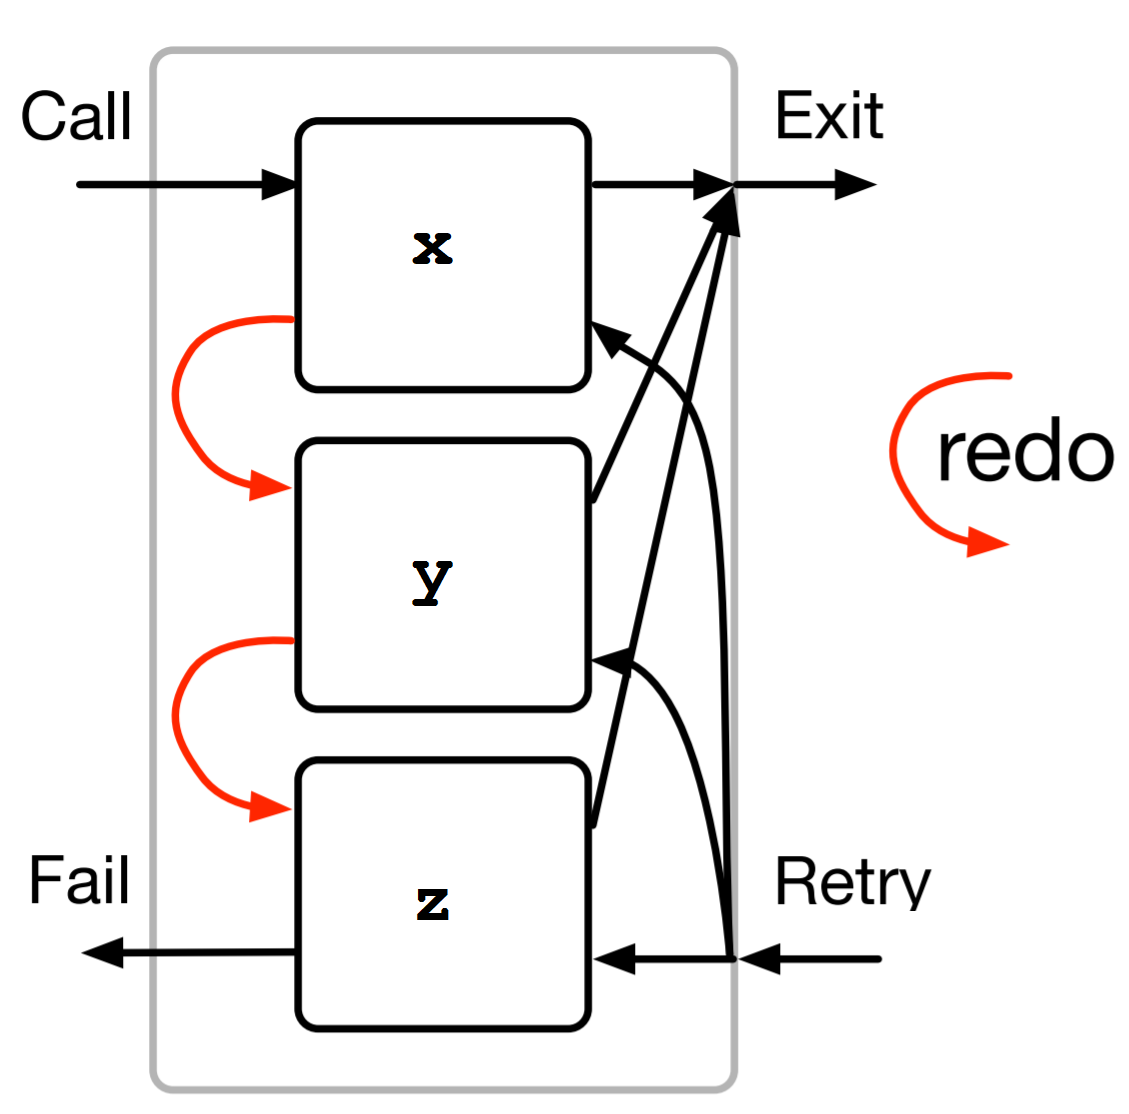 Box Model of a series of rules